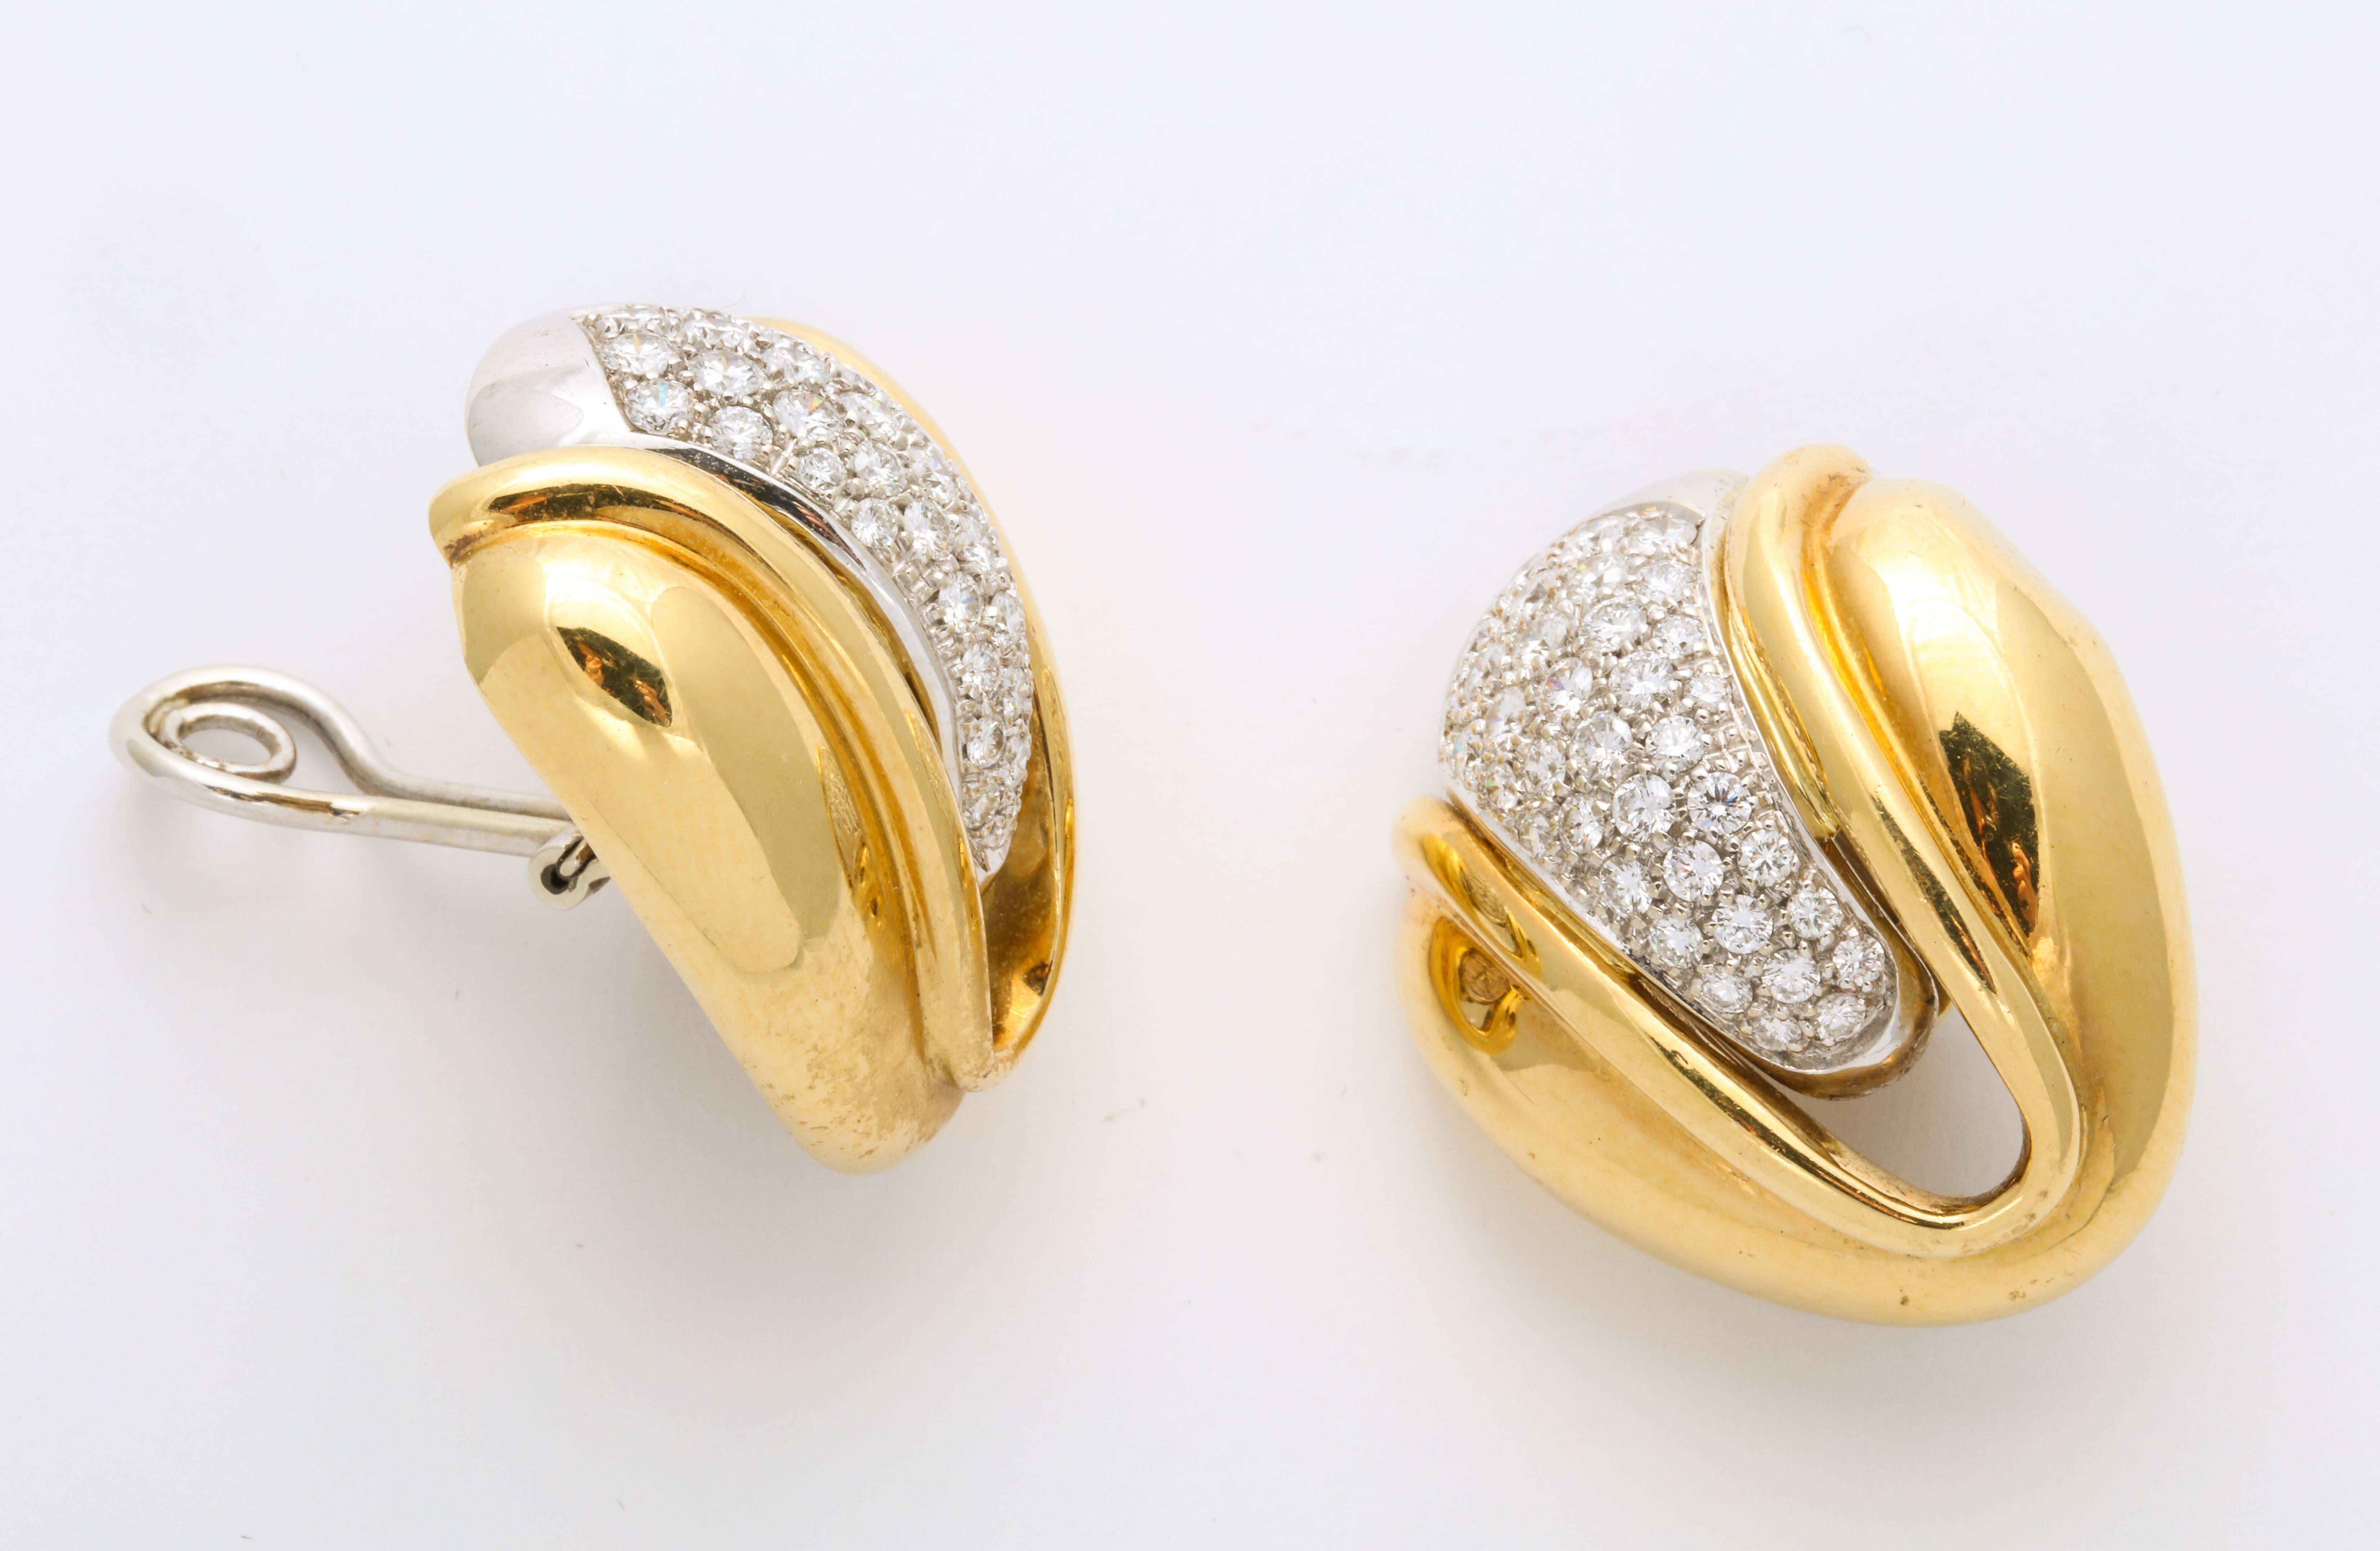 A great pair of stylized petal form earrings in 18K  gold with a significant cluster of diamonds set in platinum in the center   The diamonds are approximately 4-5 cts. Marked Italy and gold mark. They have a clip/post option. 